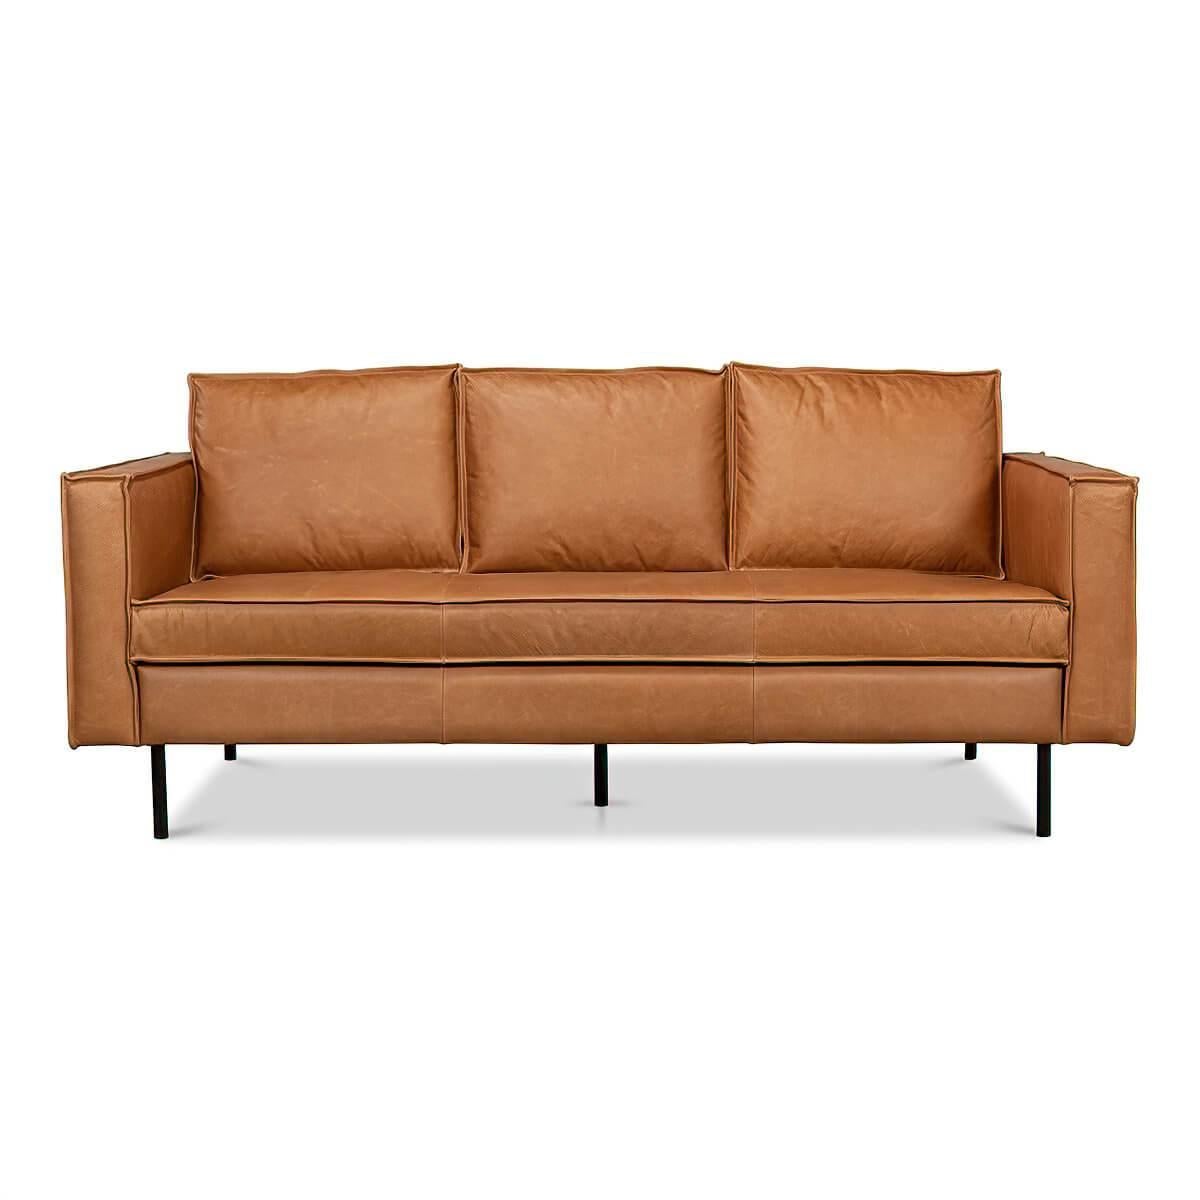 An Italian Mid-Century Modern style leather upholstered sofa with a bold box form raised on a minimalist iron leg base.

Dimensions: 74